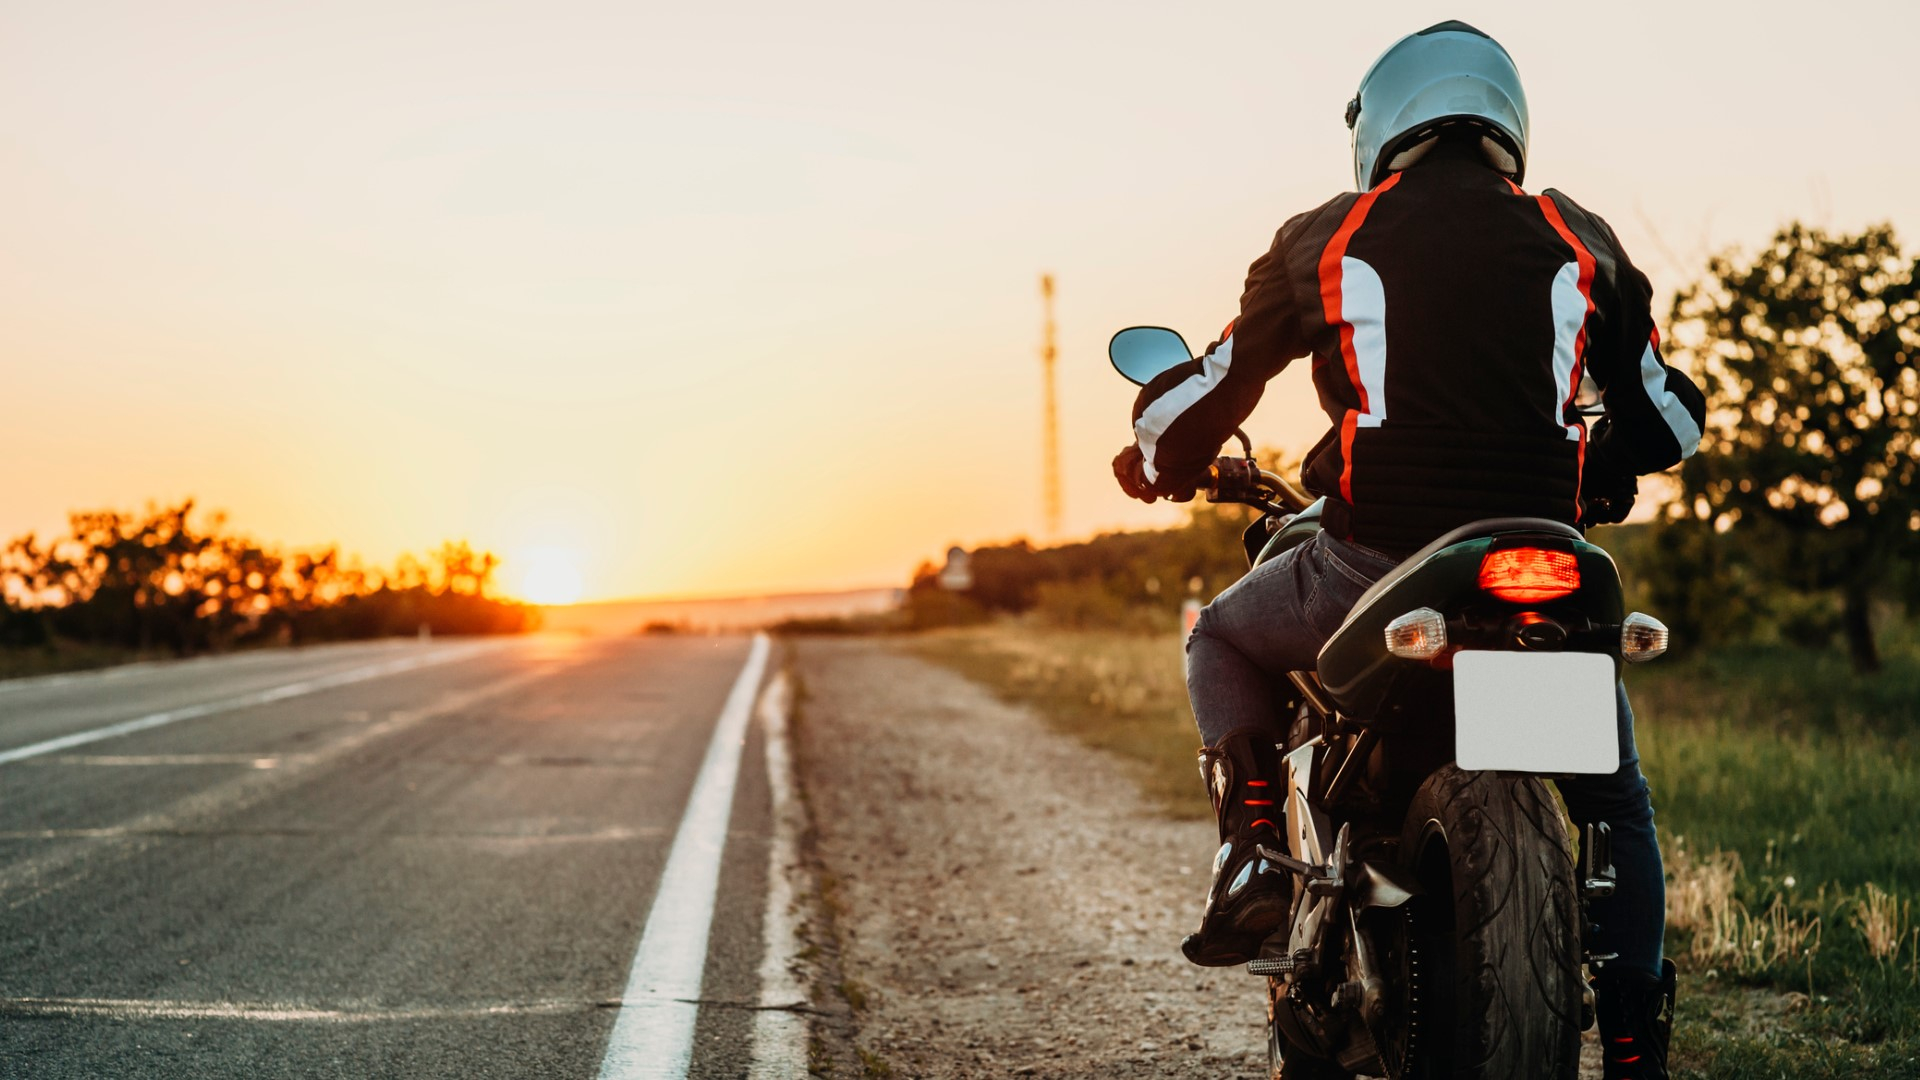 Washington State Will Now Require Motorcycle Insurance intended for size 1920 X 1080